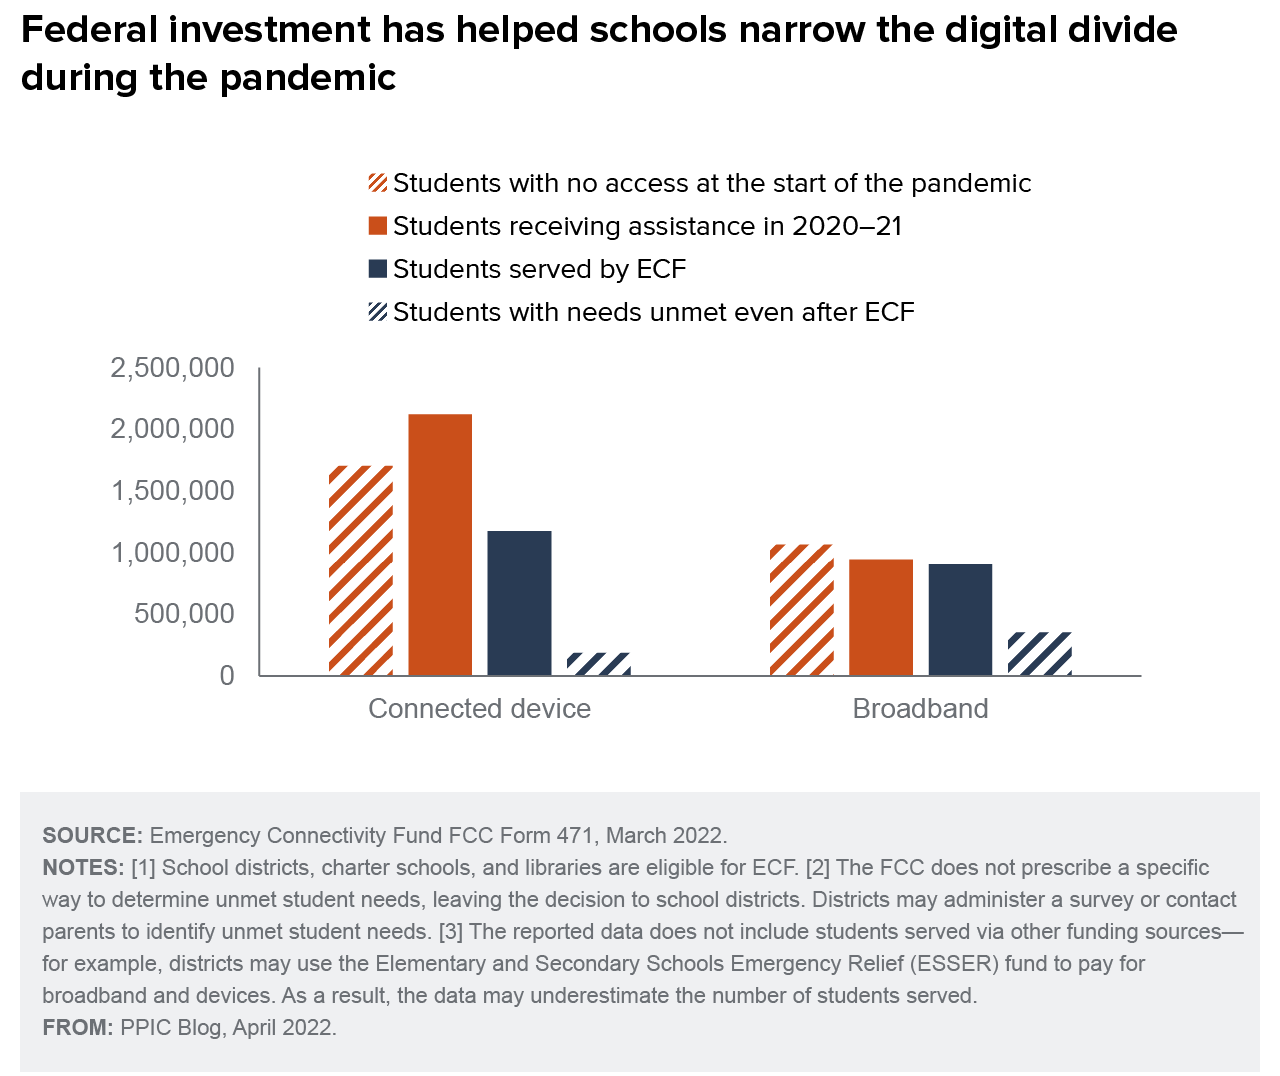 figure - Federal investment has helped schools narrow the digital divide during the pandemic